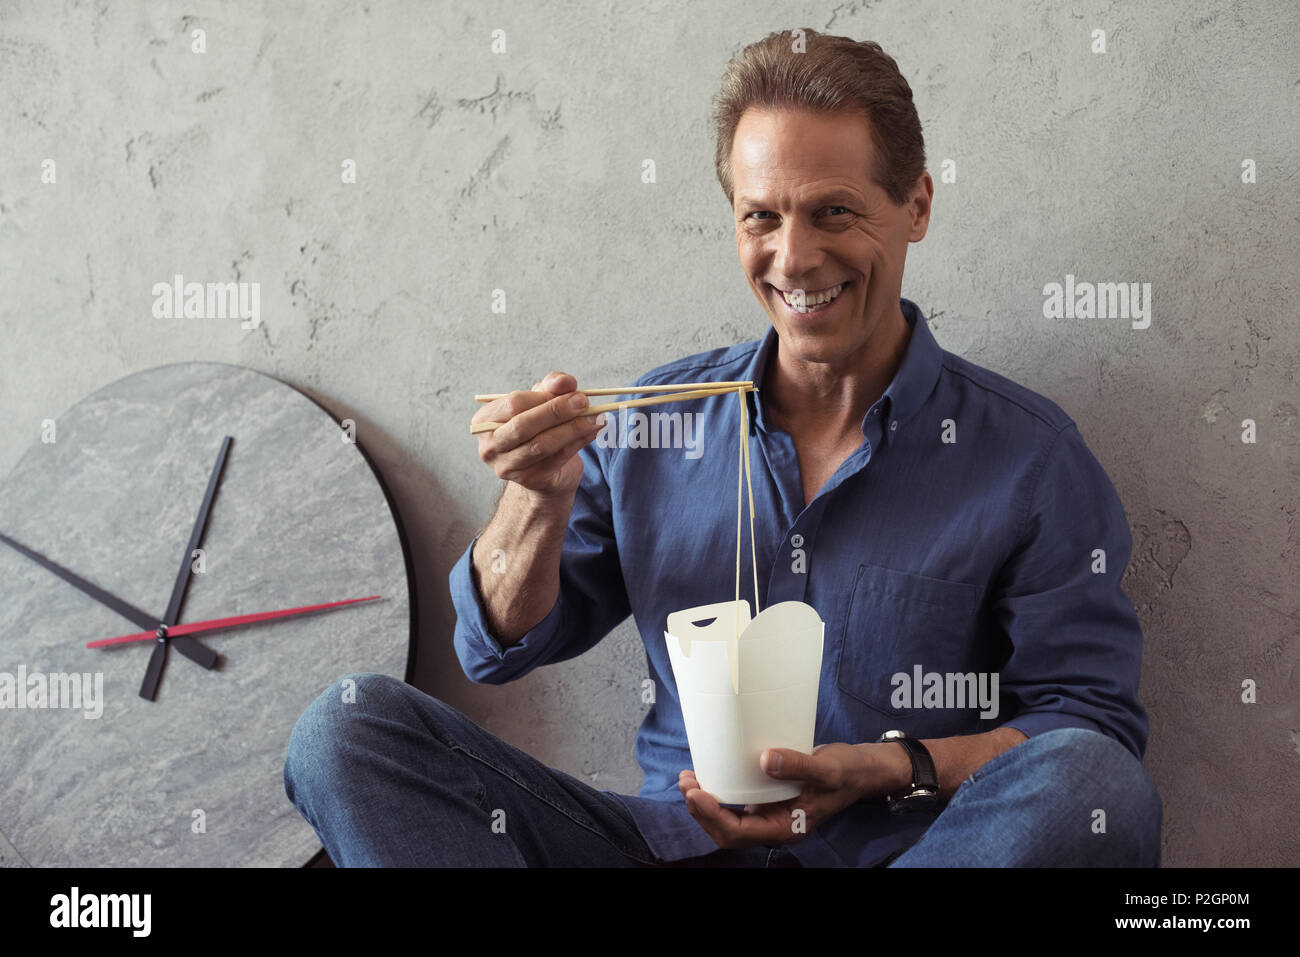 smiling middle aged man eating noodles and looking at camera Stock Photo